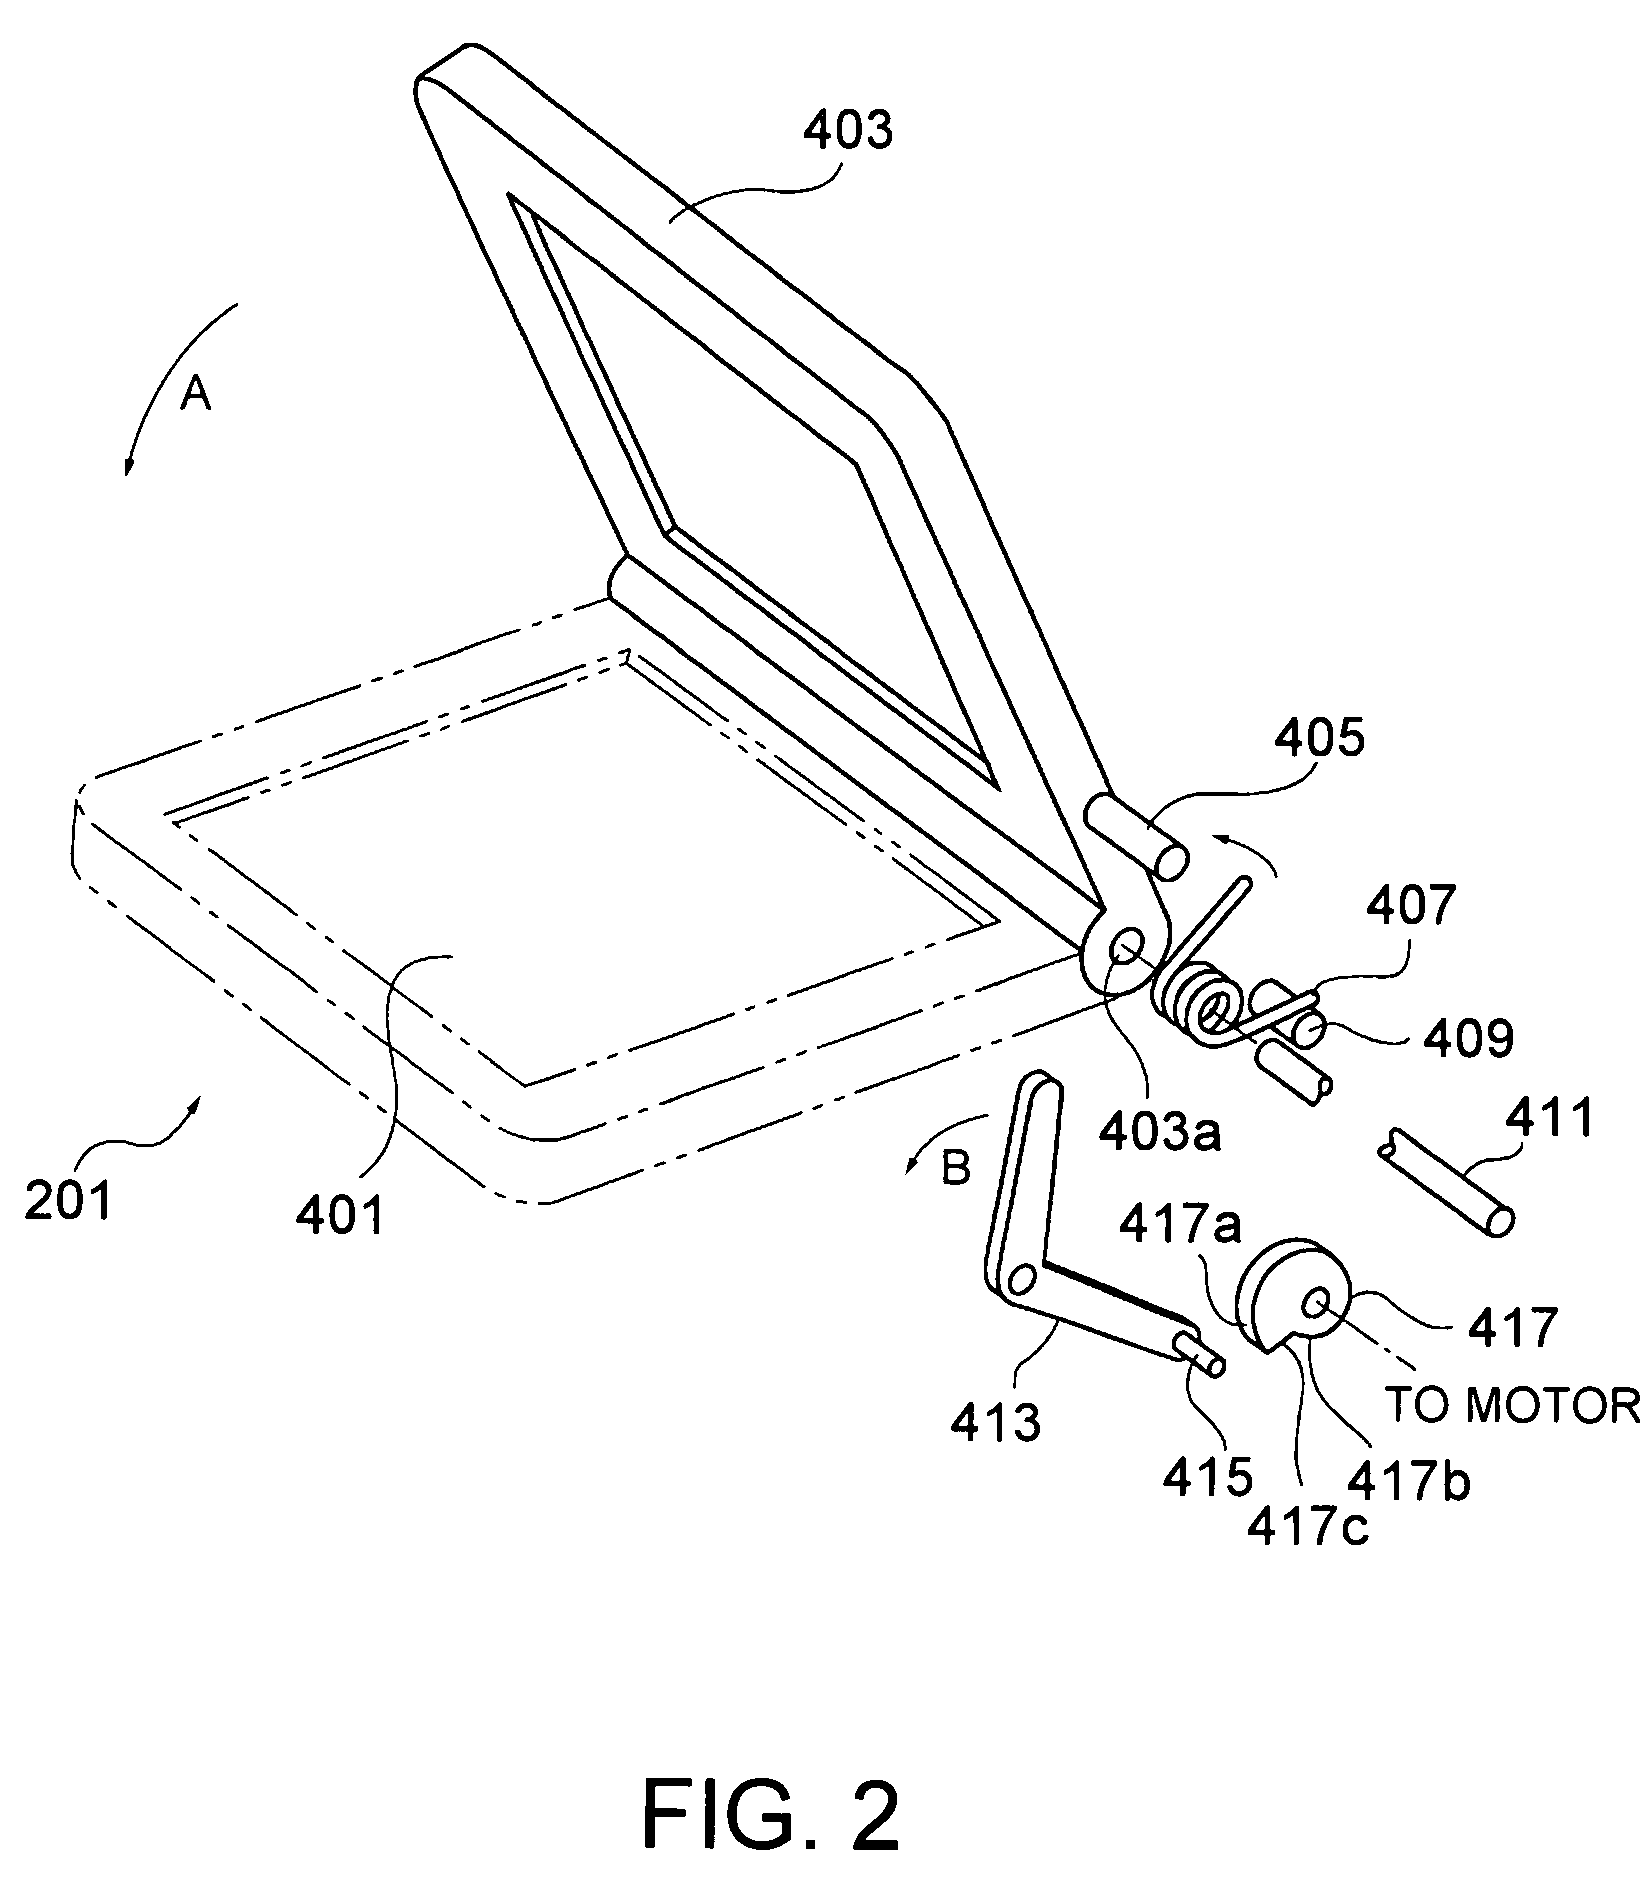 Aperture value calculation for a digital camera capable of displaying and/or recording a movie image